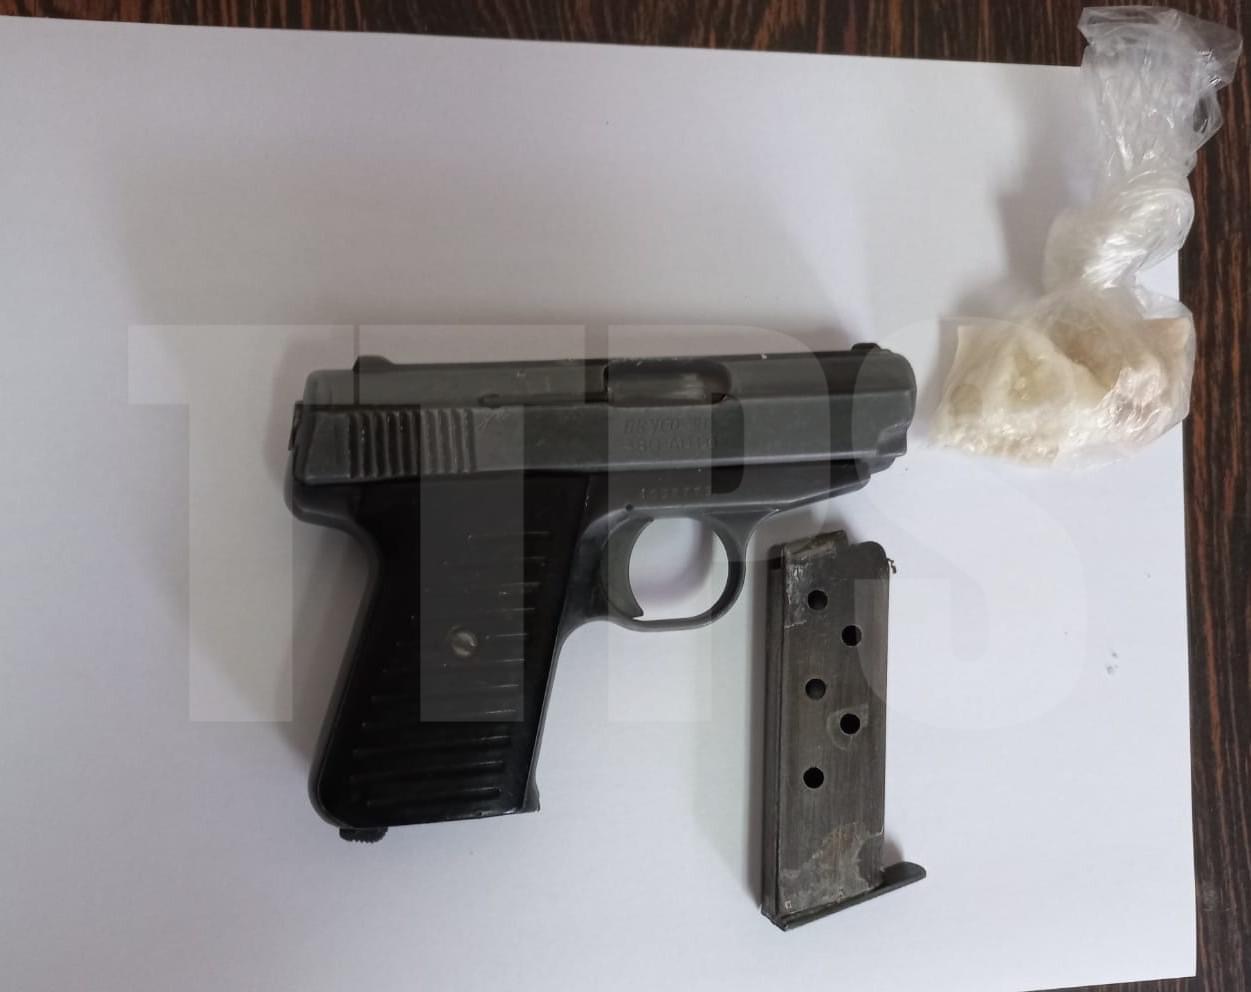 Firearm and cocaine seized in PoS during anti-crime exercise